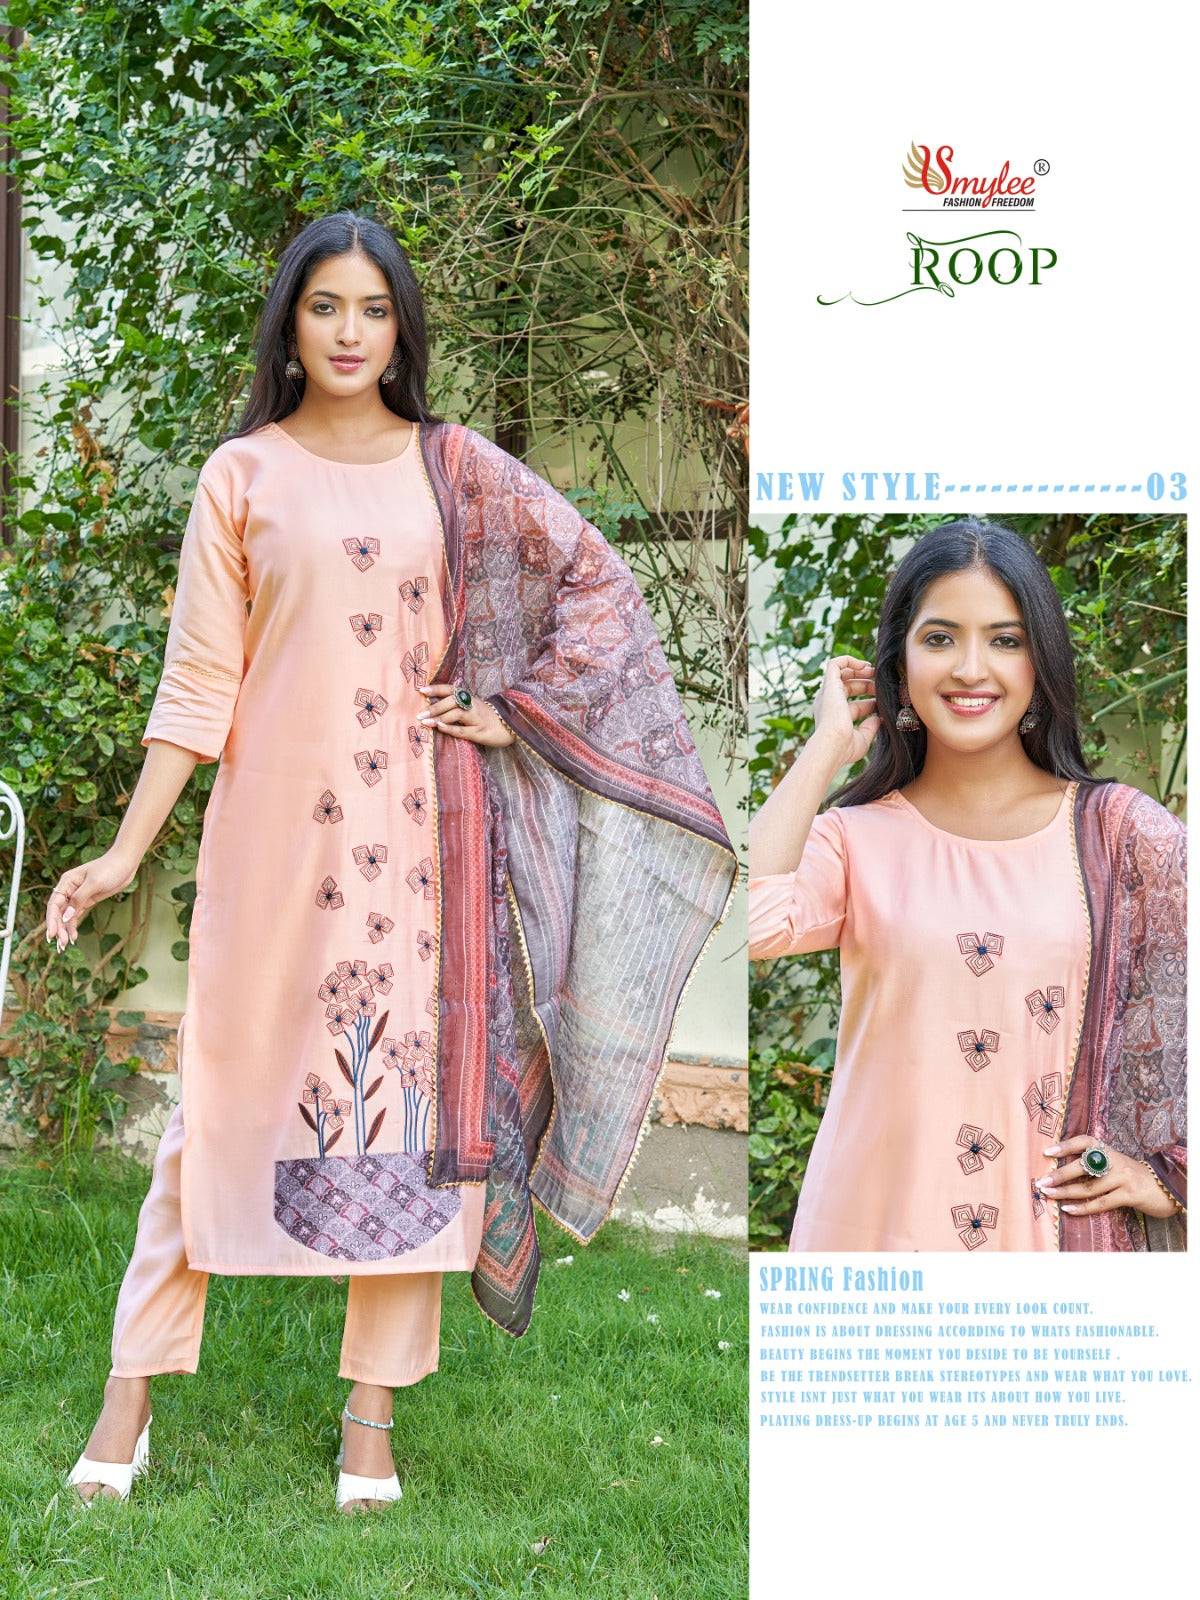 Roop Smylee Roman Silk Readymade Pant Style Suits